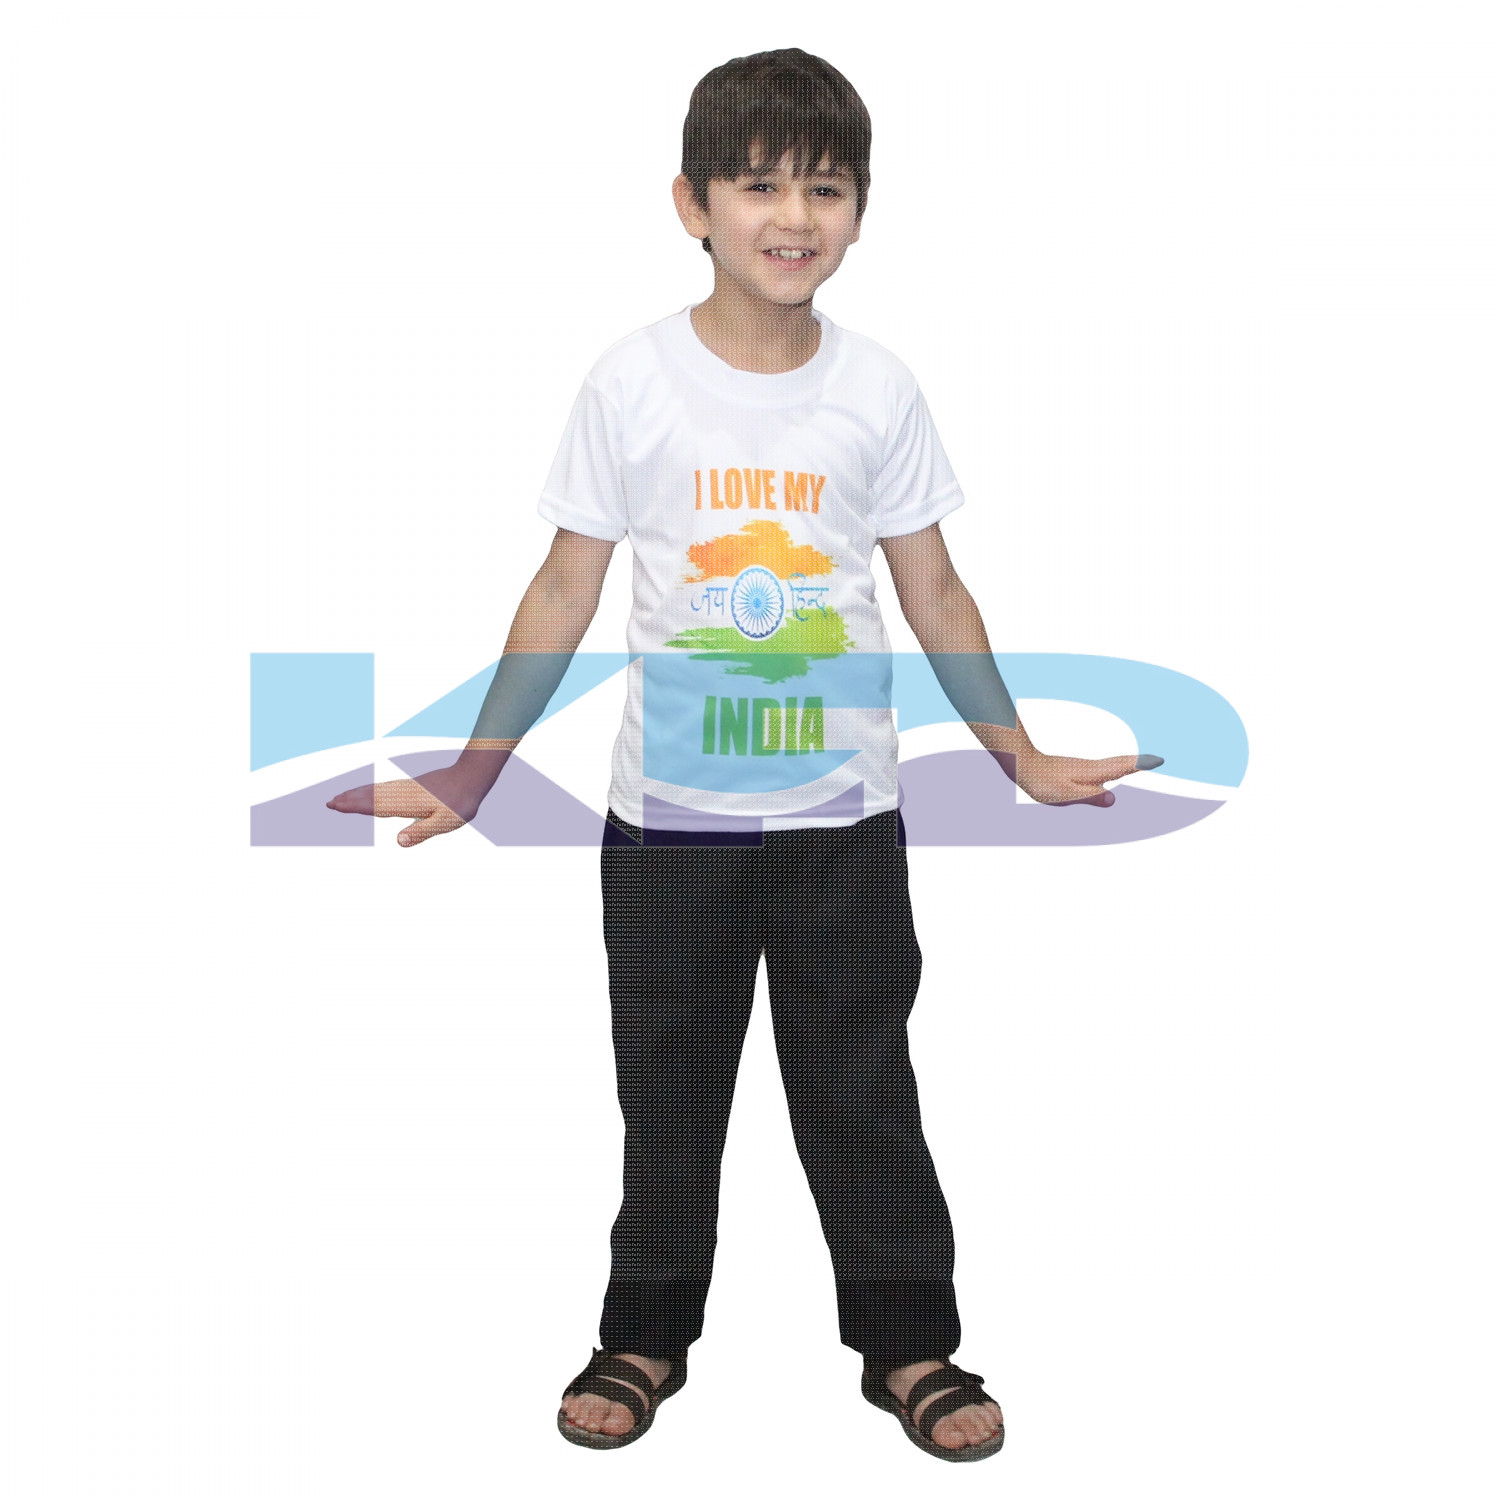 India T Shirt Costume For Kids/I love my india t-shirt/School Annual function/Theme Party/Competition/Stage Shows/Birthday Party Dress